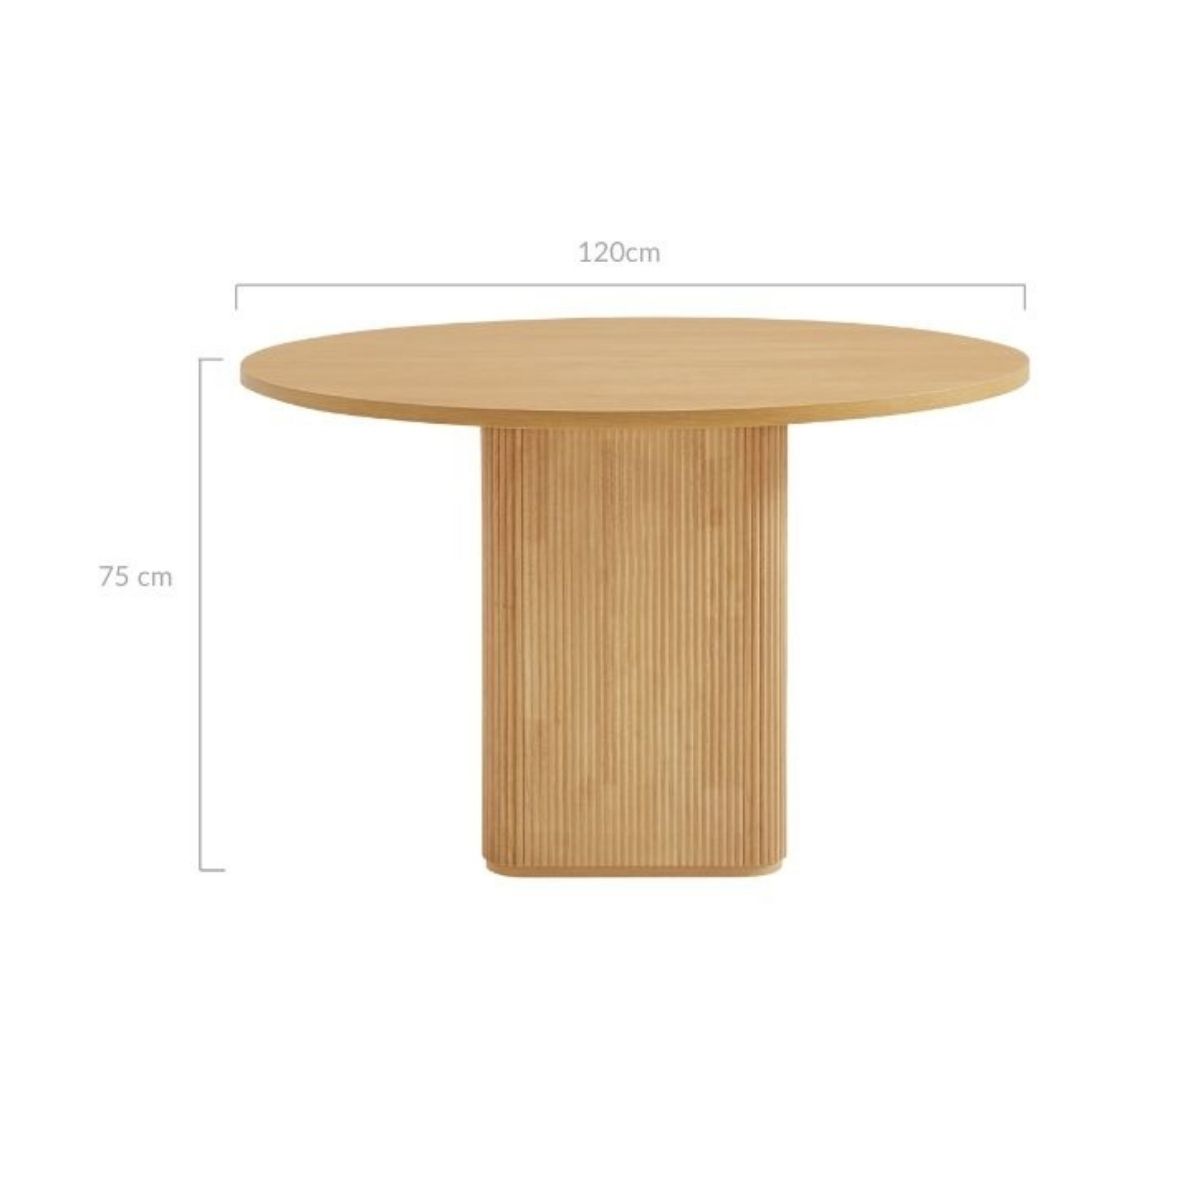 Tate 4 Seater Column Dining Table in Natural